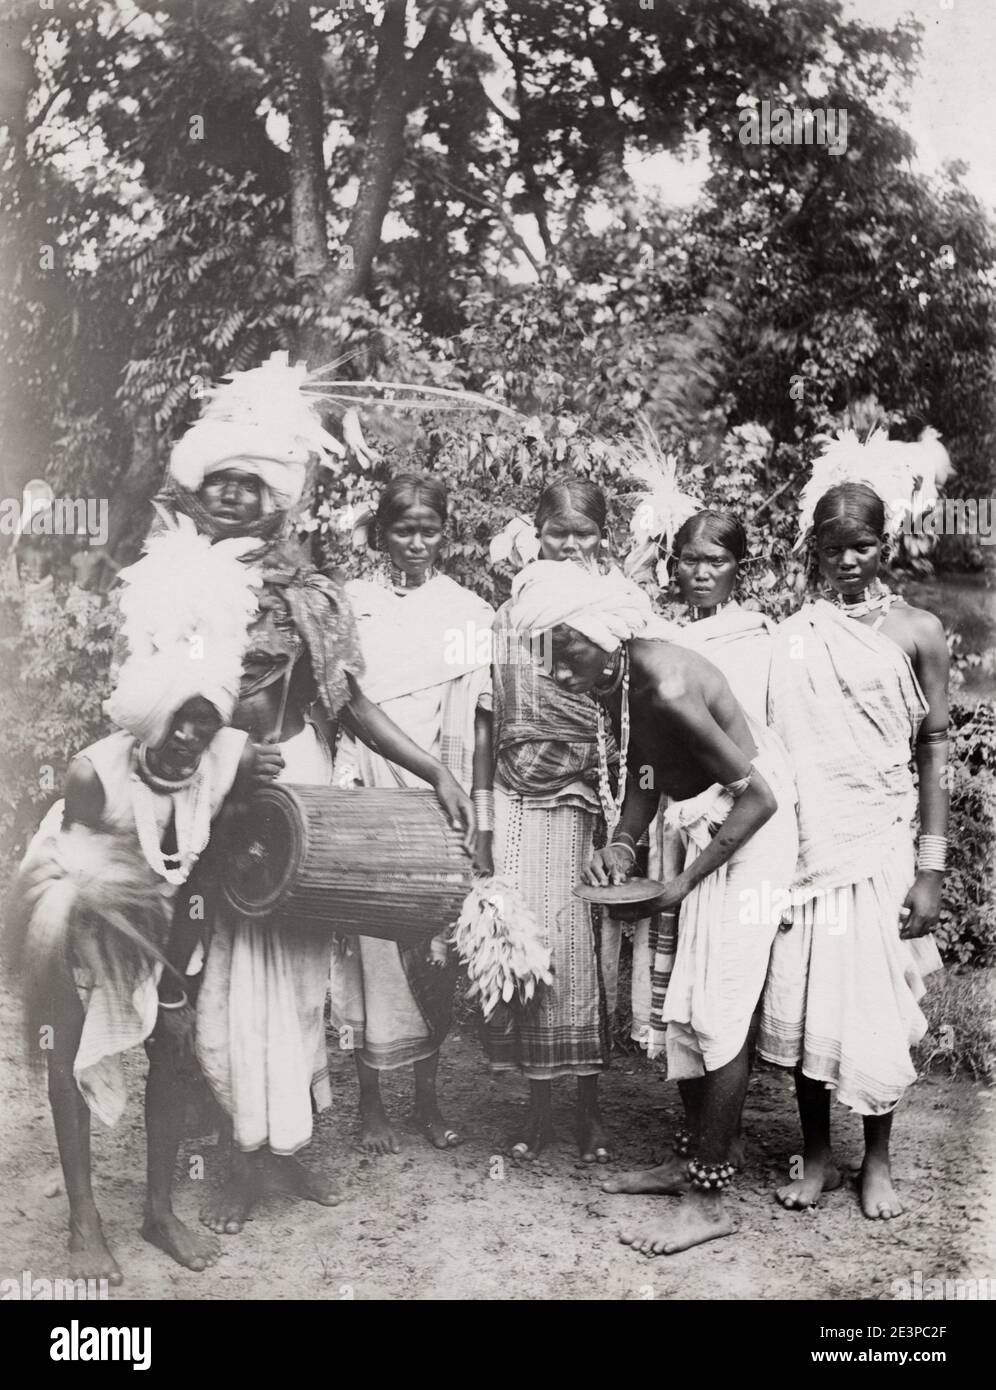 Vintage 19th century photograph: print captioned Kola Dancers. At one time,  the name "Kol" was used to identify a group of primitive aboriginal tribes  thought to be descended from Negrito and Australoid